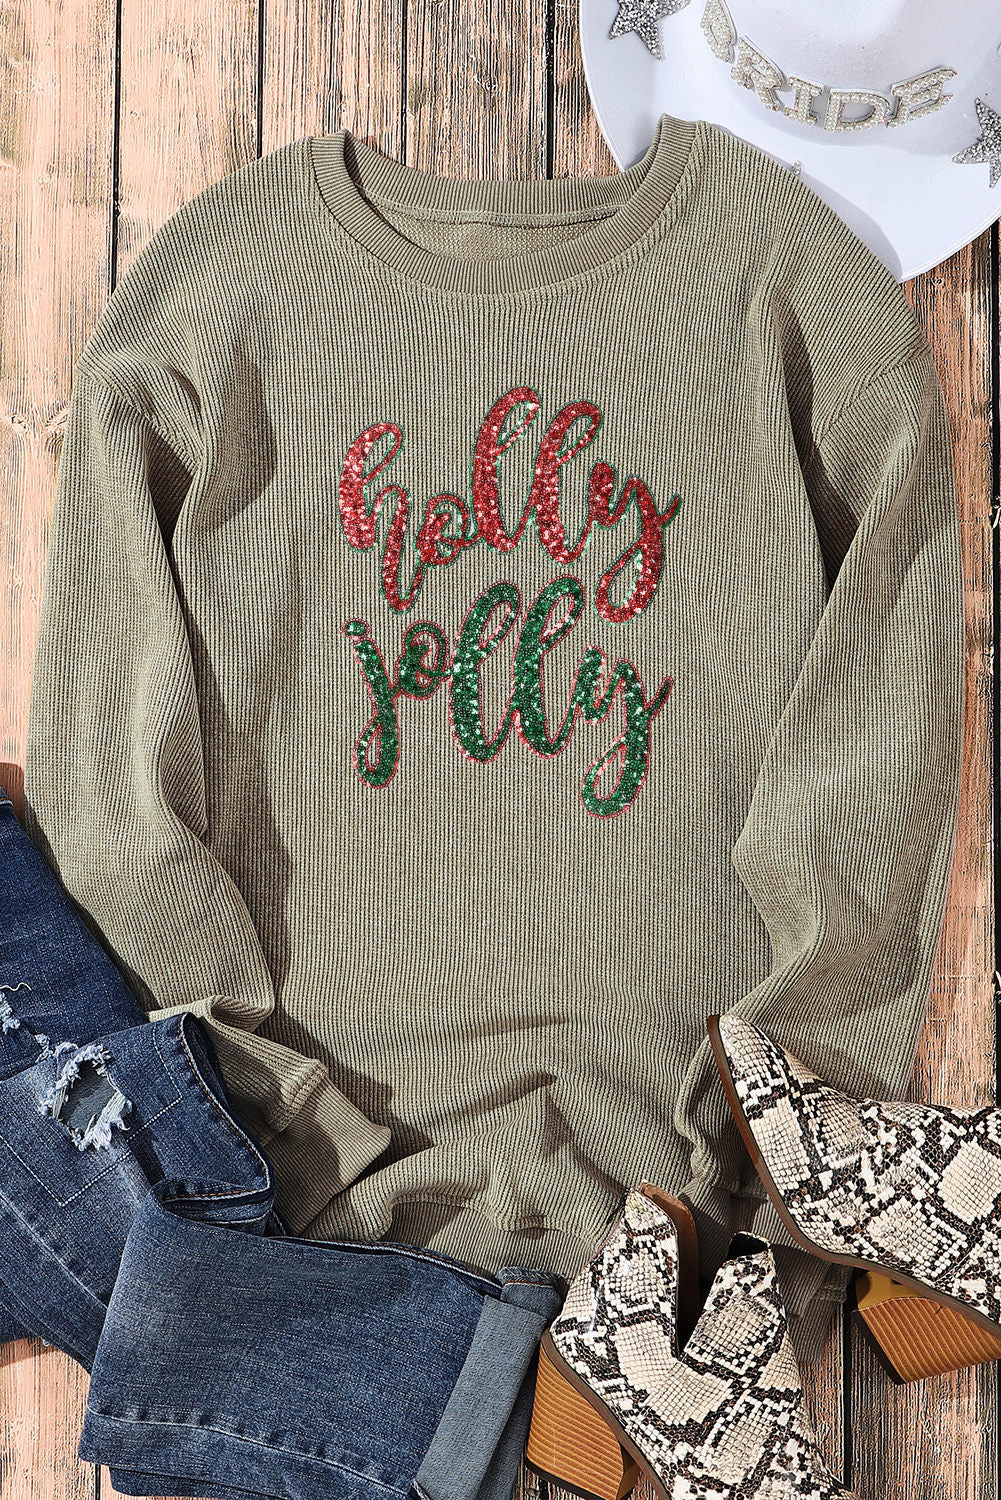 LC25316789-9-S, LC25316789-9-M, LC25316789-9-L, LC25316789-9-XL, LC25316789-9-2XL, Green Women Christmas Sweatshirts Sequined Holly Jolly Graphic Corded Sweatshirt